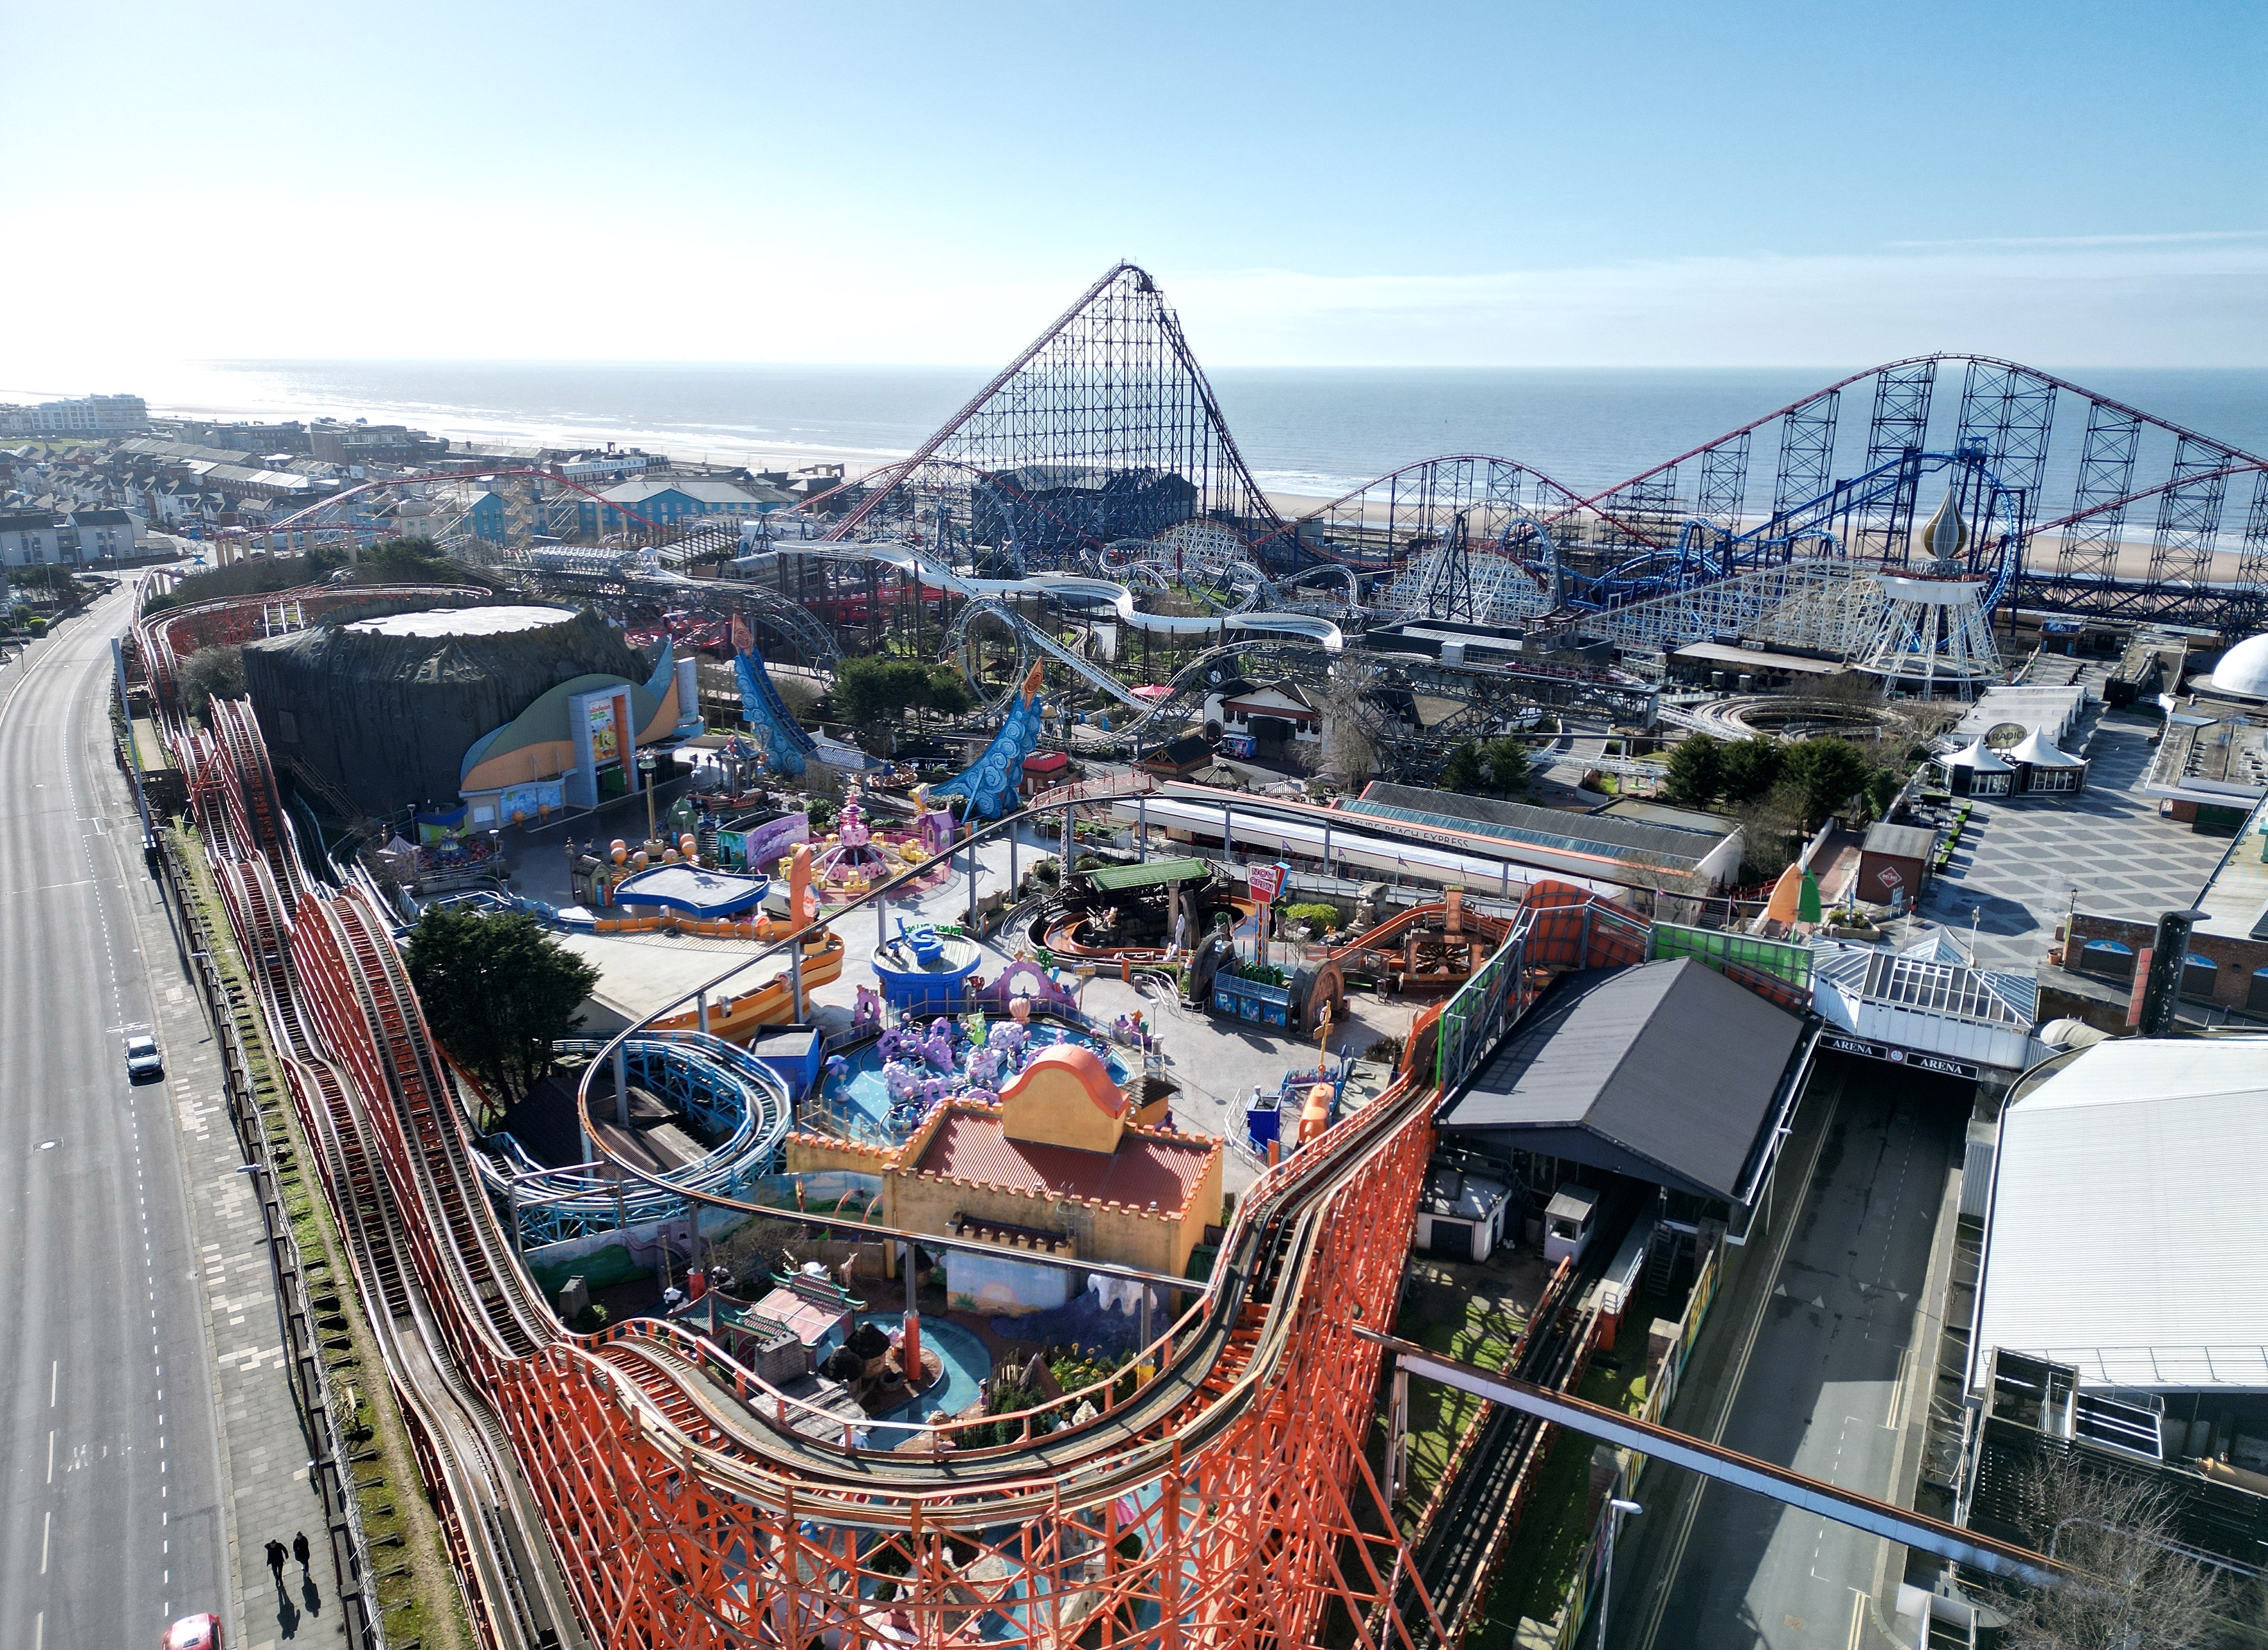 The Iconic Blackpool Pleasure Beach ride to close for good. The Grand Prix in Blackpool has been in place for over 60 years.Pic shows Drone Picture of Blackpool Pleasure Beach